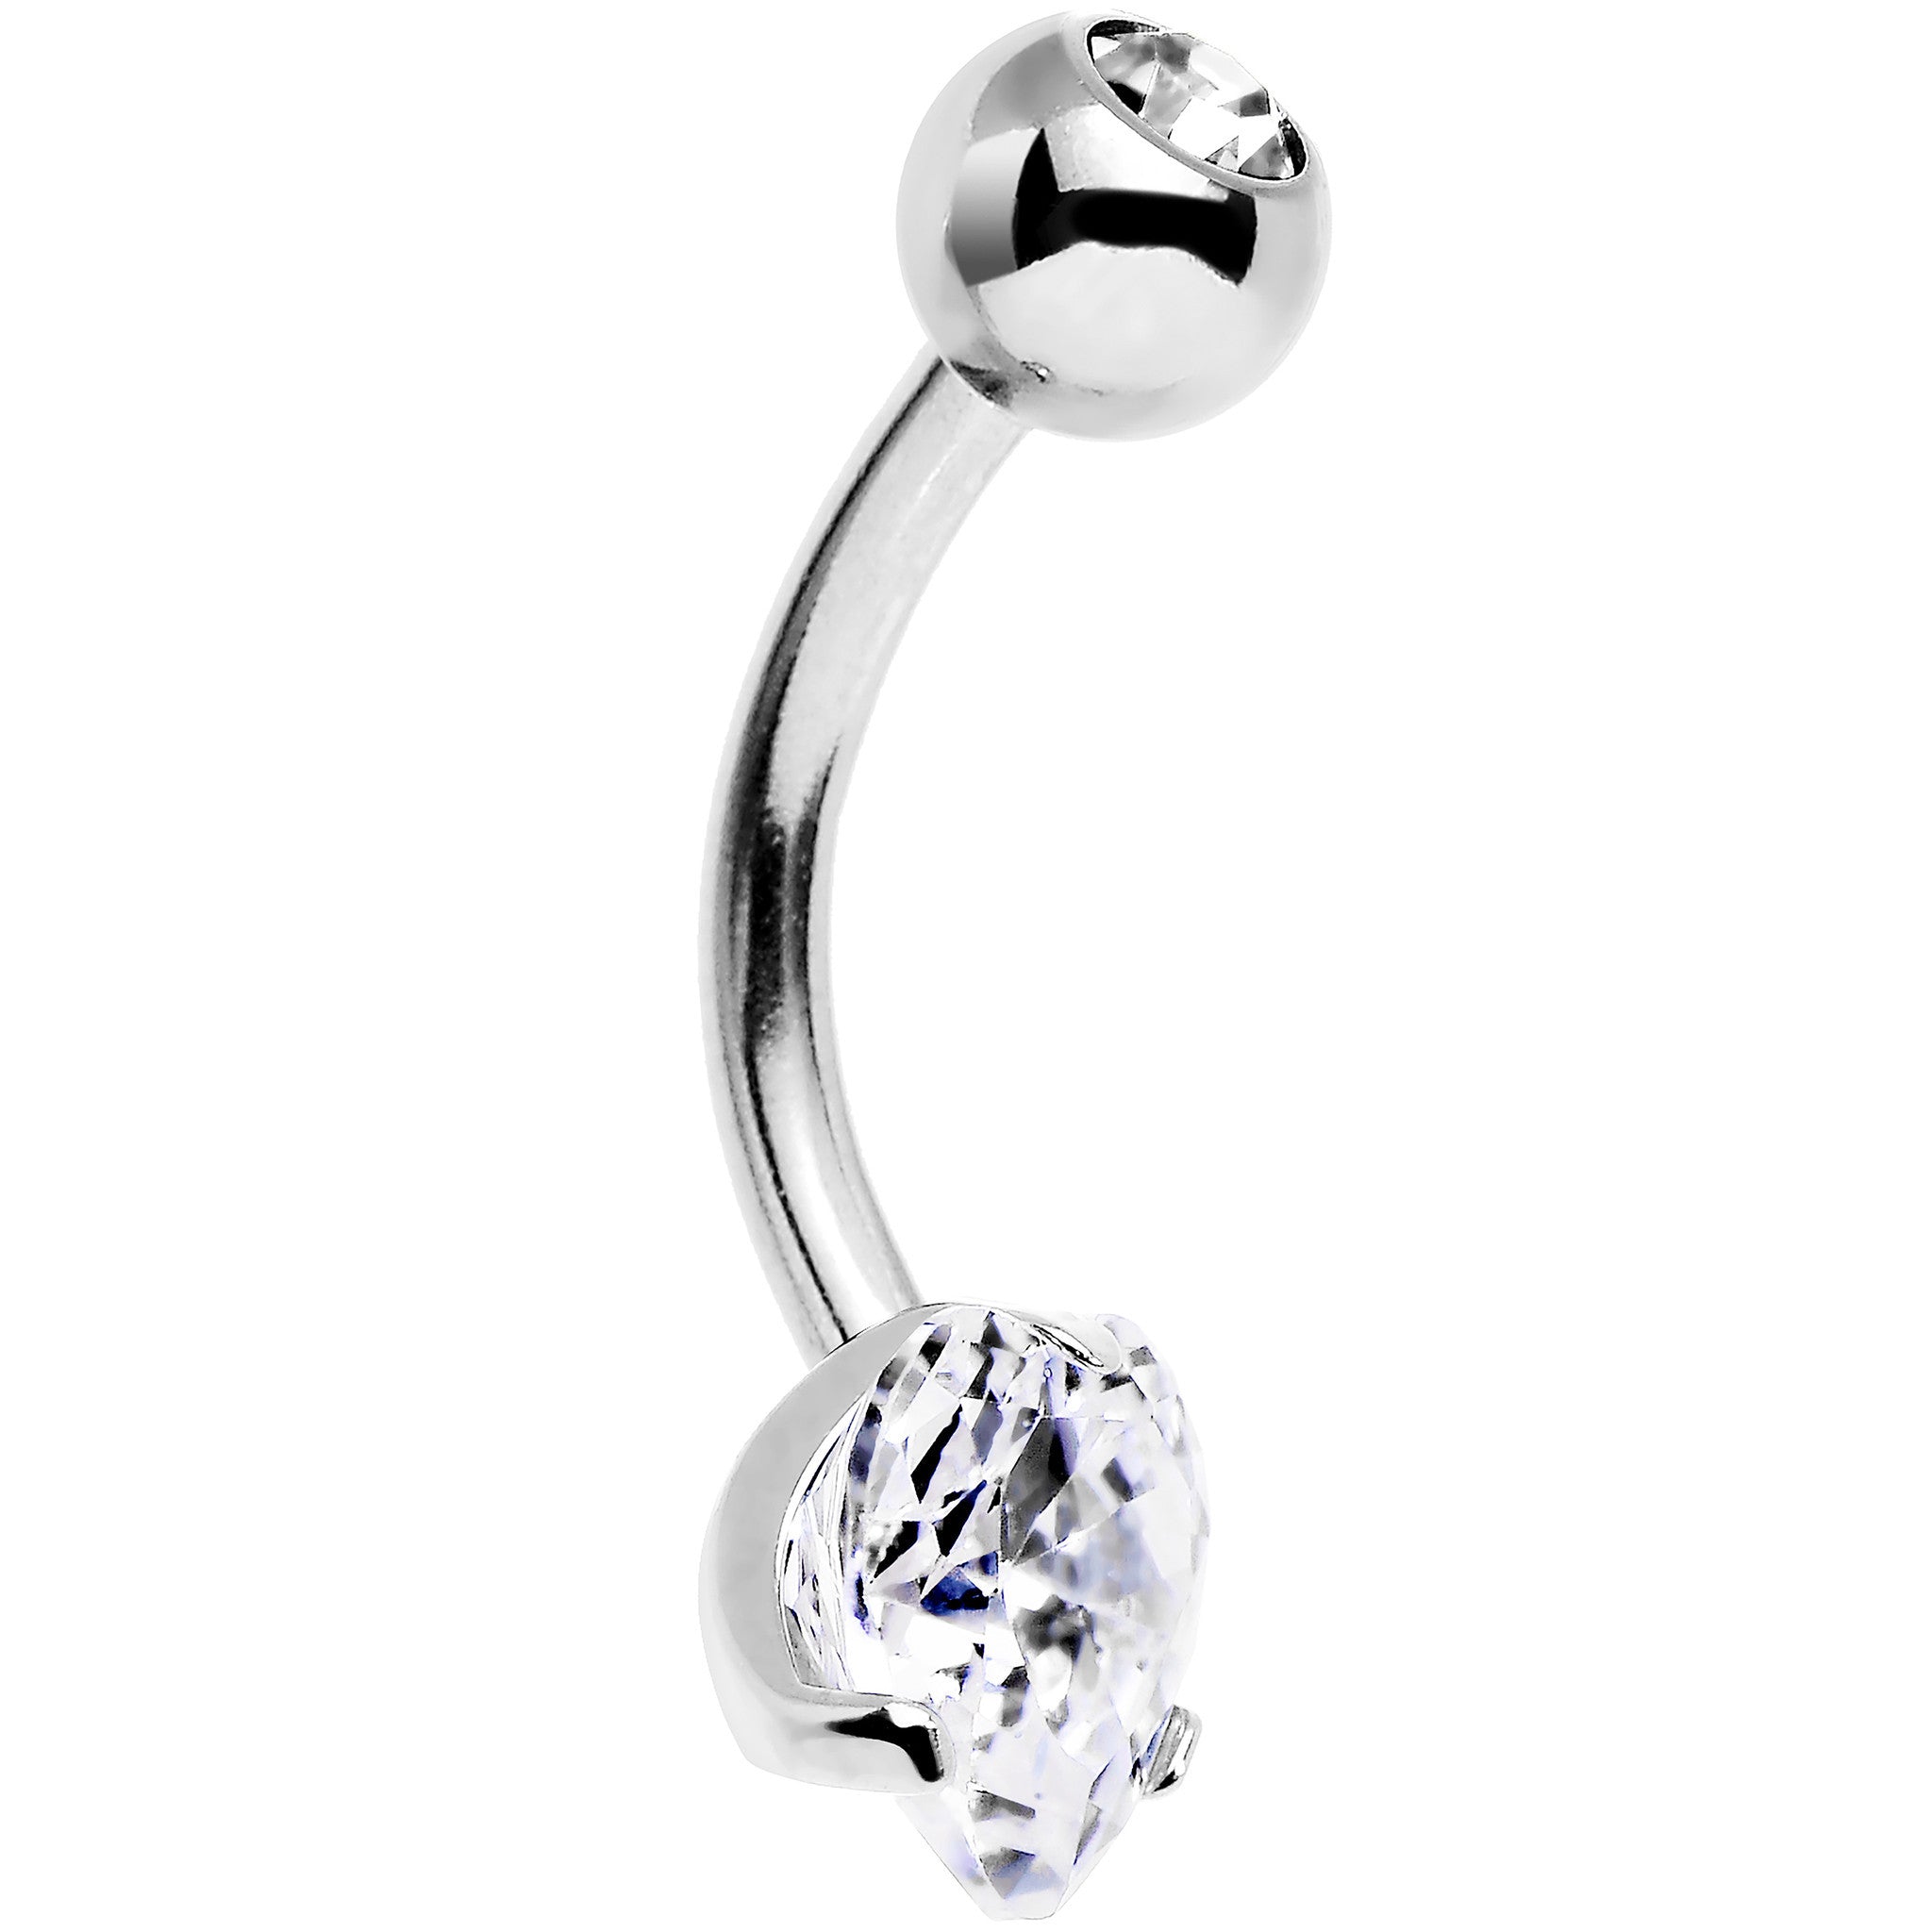 Crystal Clear Cubic Zirconia Sparkling Heart Belly Ring